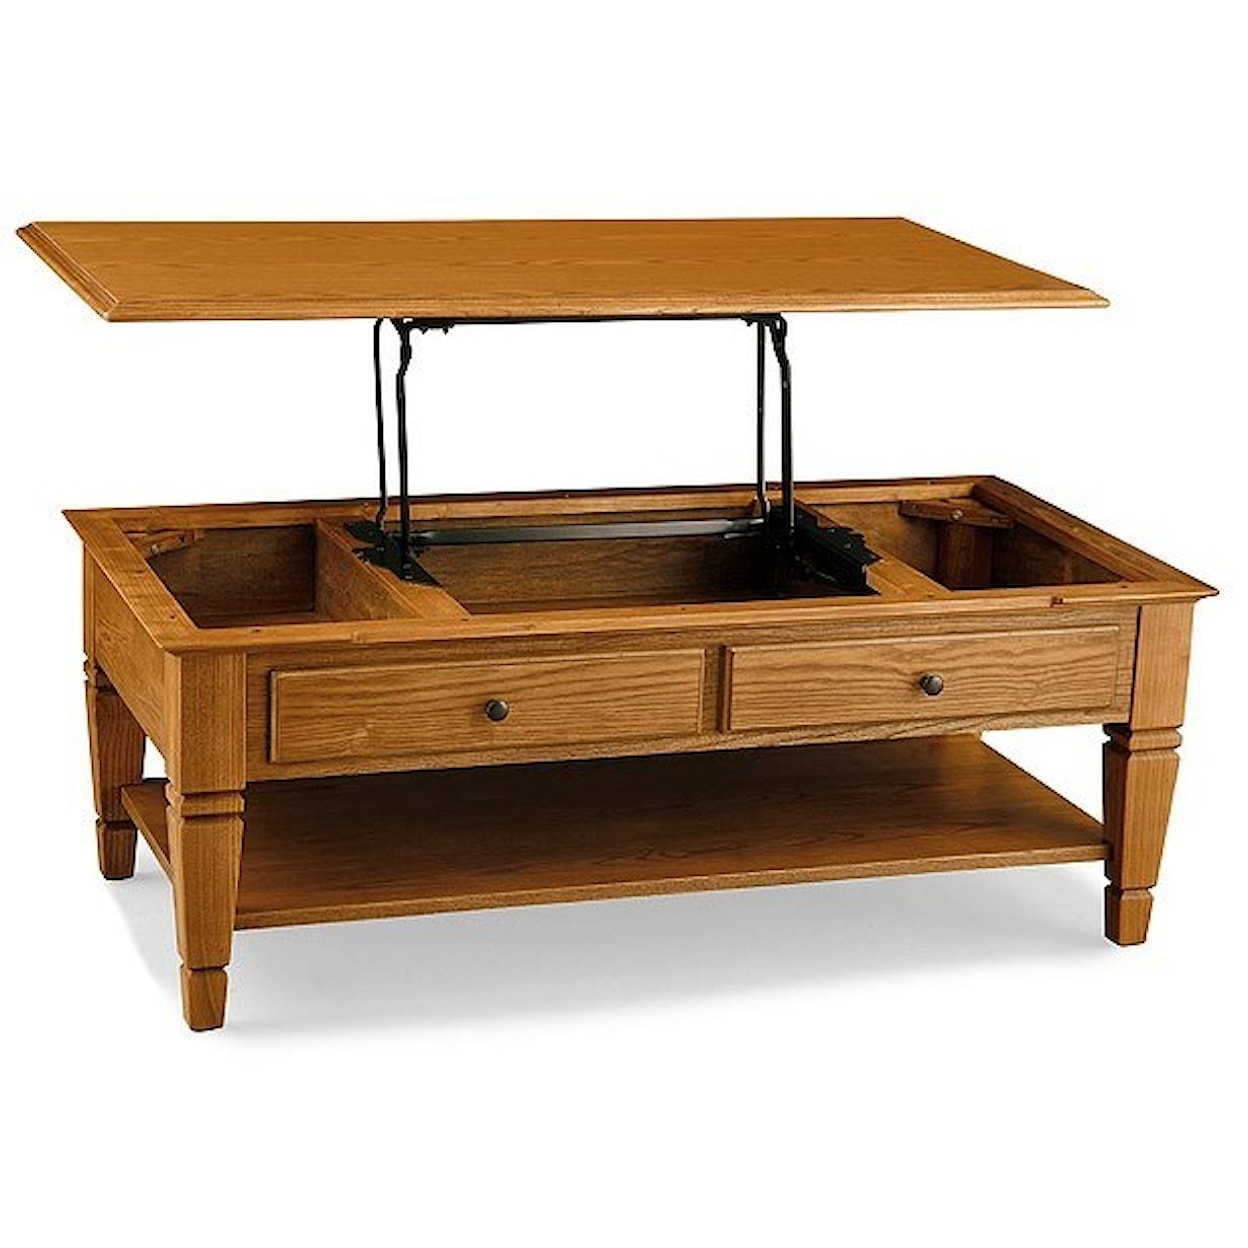 Peters Revington WestEnd Cocktail Table with Lift-Top